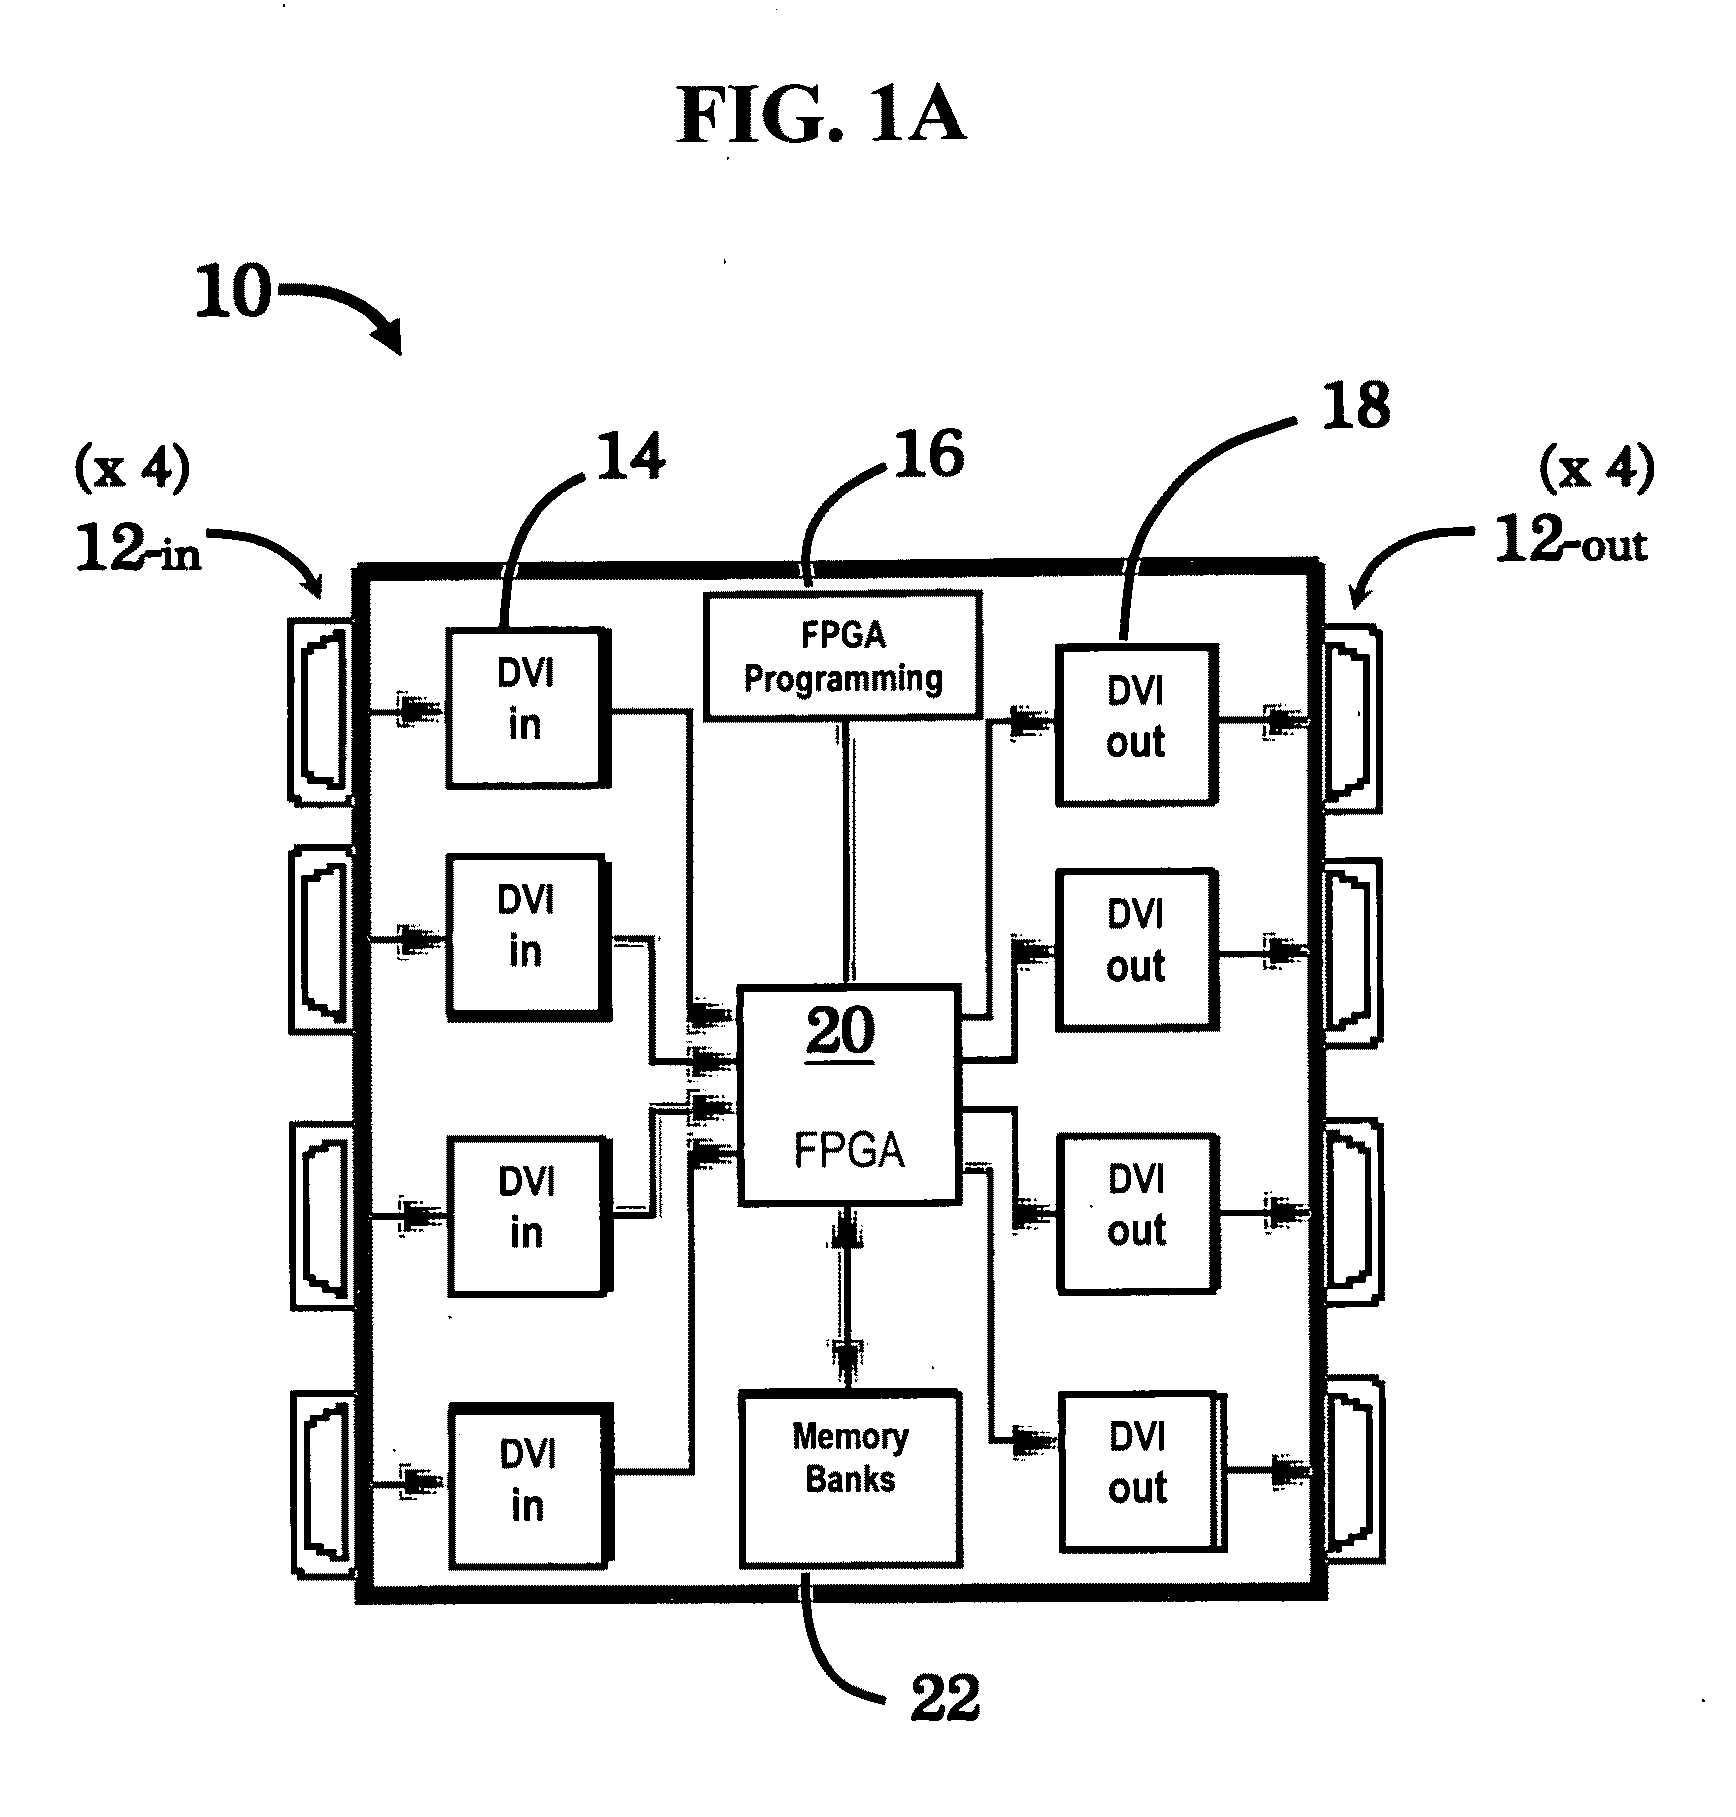 Source and output device-independent pixel compositor device adapted to incorporate the digital visual interface (DVI)